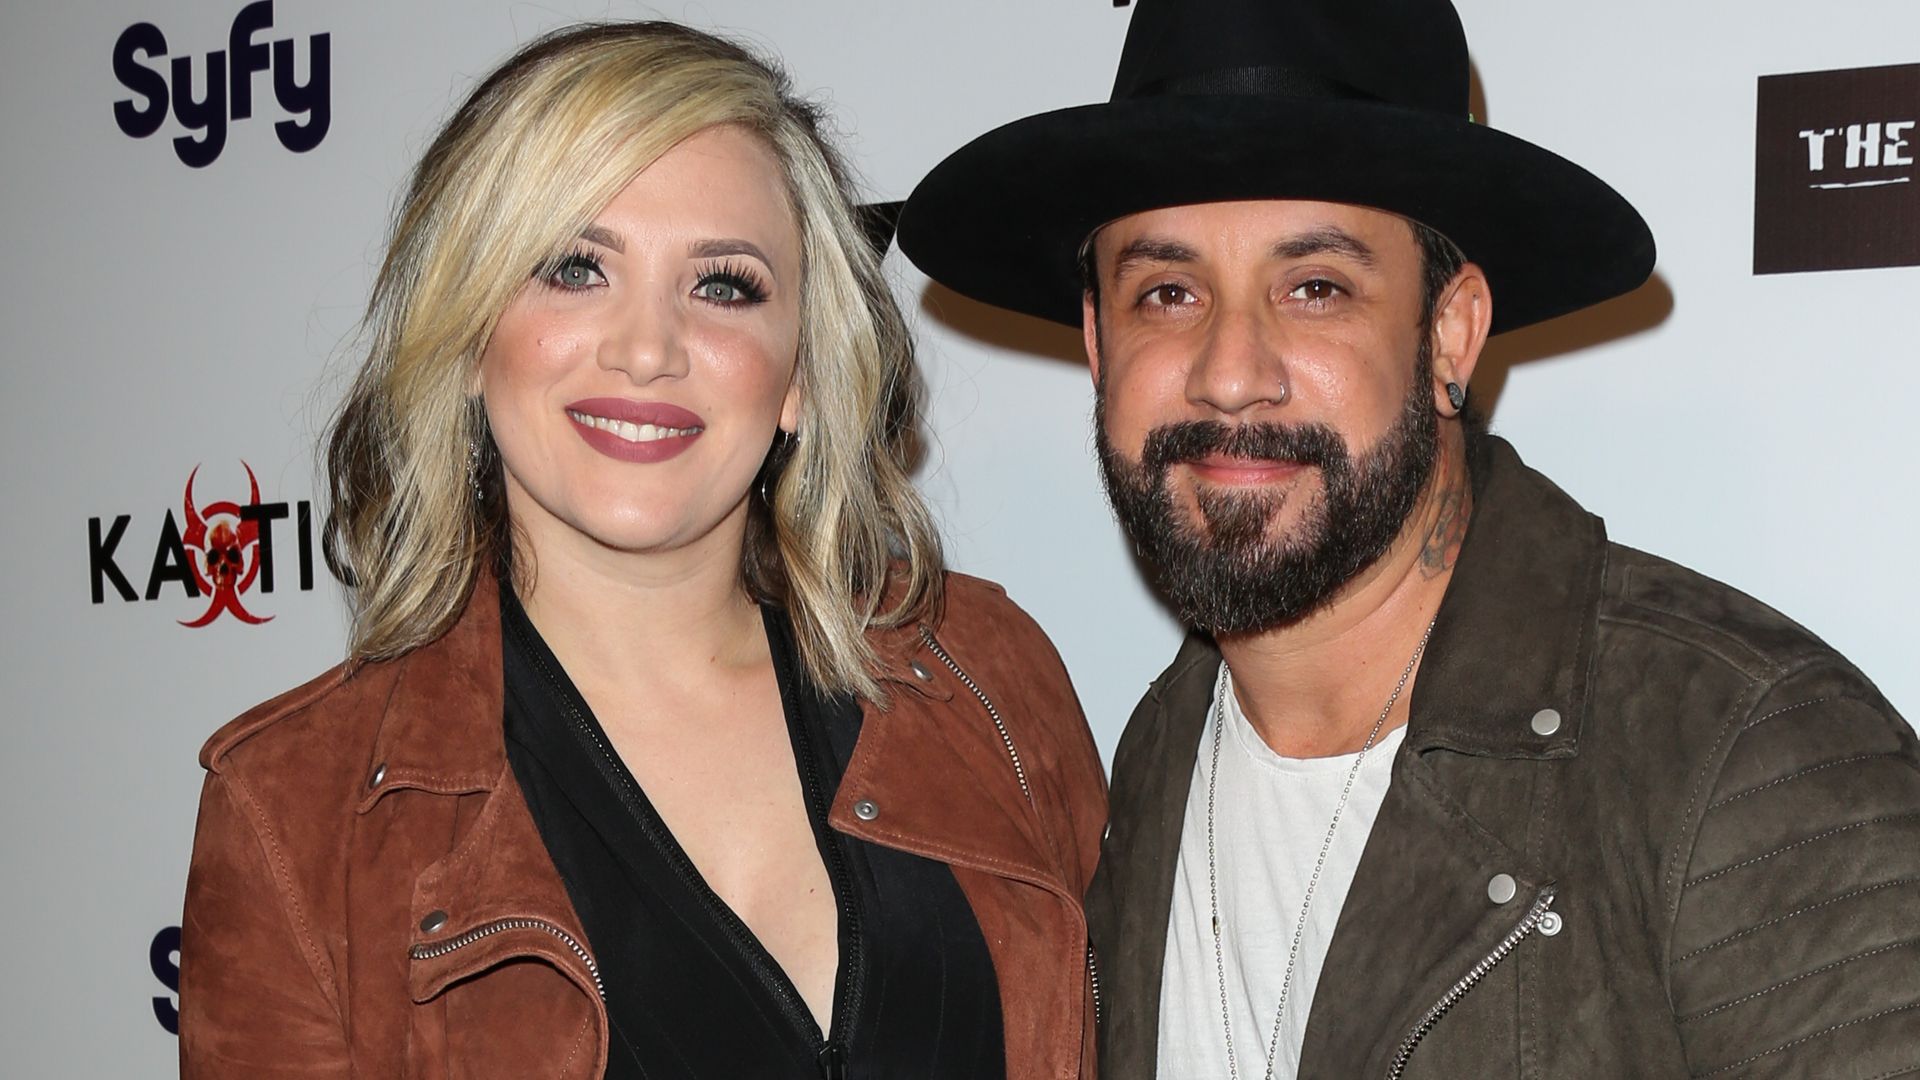 Singer AJ McLean (R) and his Wife Rochelle Deanna Karidis (L) attend the premiere of Syfy's "Dead 7" at Harmony Gold on April 1, 2016 in Los Angeles, California.